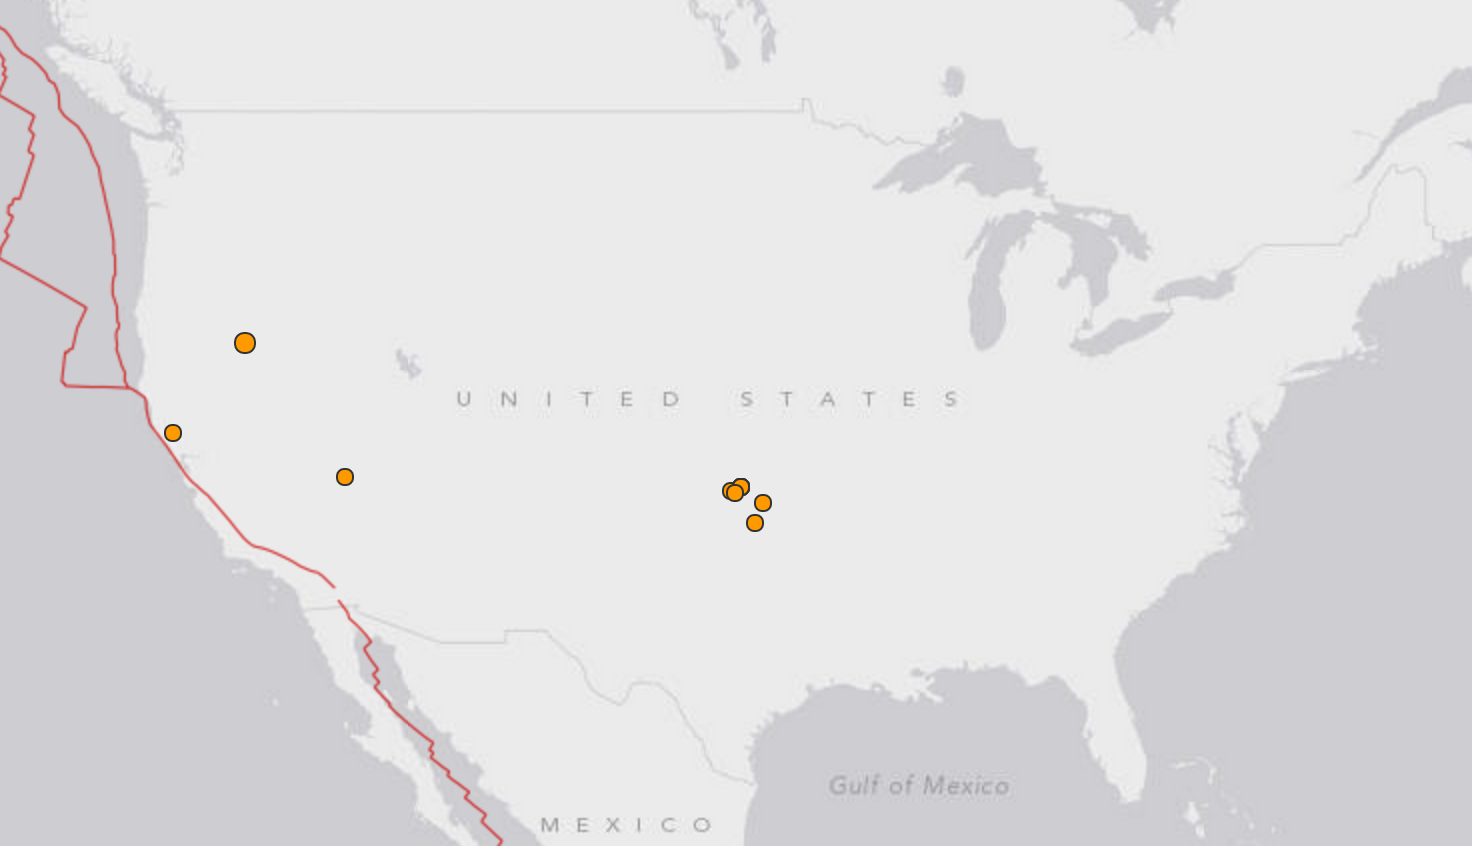  The USGS real-time earthquake map showing the earthquakes that occurred throughout the U.S. today.  